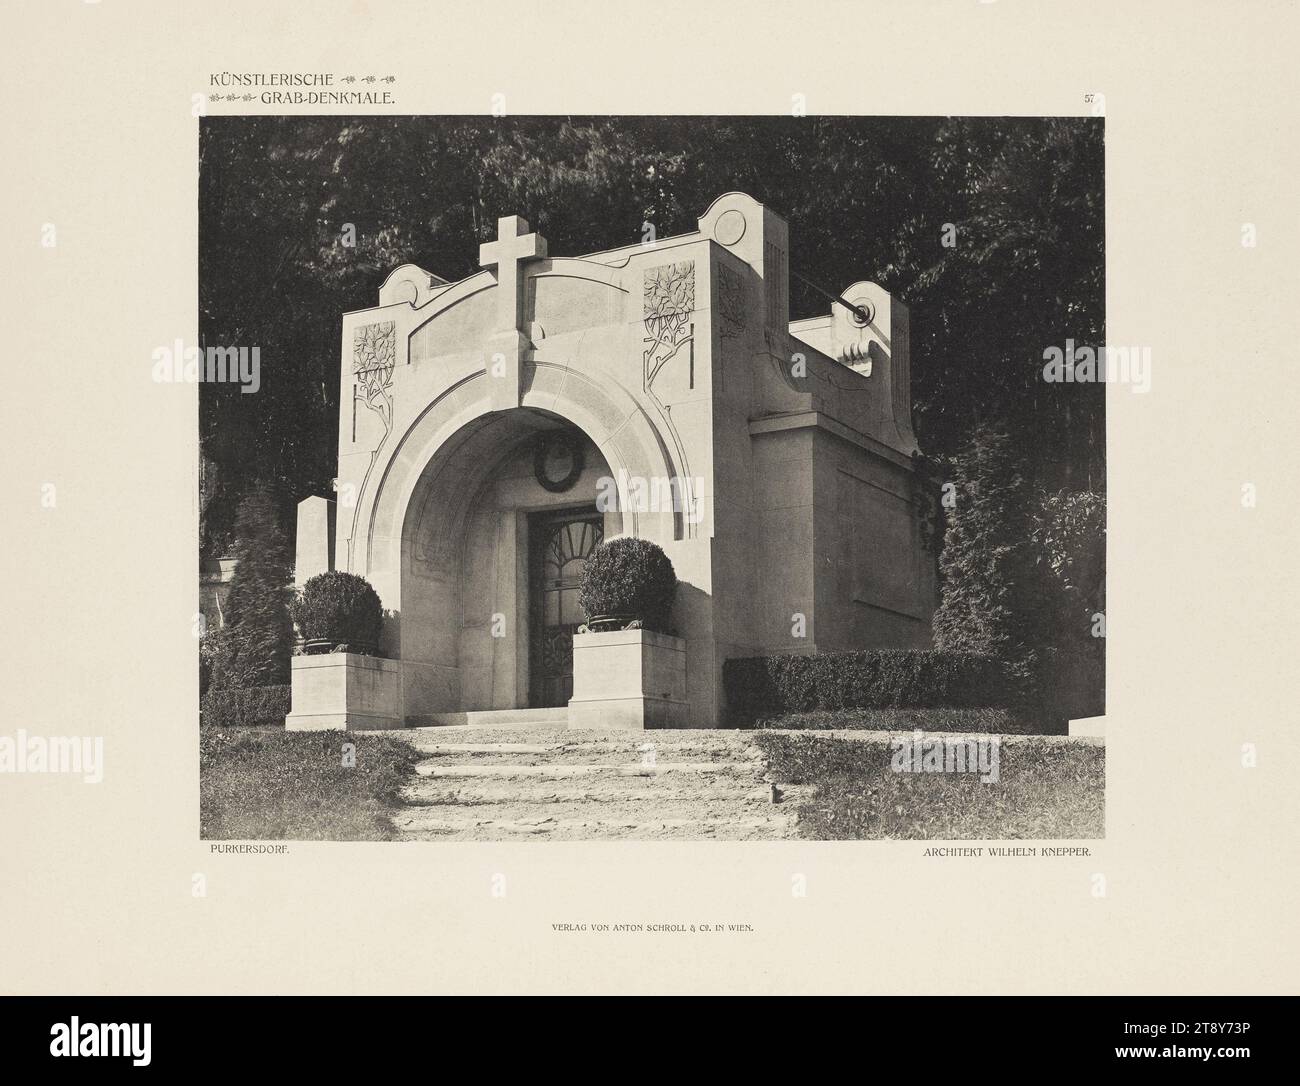 Purkersdorf, Mausoleum Joppich, architect Wilhelm Knepper (sheet no. 57 from: Artistic funerary monuments. Modern architecture & sculpture of cemeteries and churches in Austria-Hungary, series 2, Anton Schroll & Co., Vienna), Anton Schroll & Co., publishing house, Date around 1910, paperboard, Collotype, sheet size 31×41 cm, Fine Arts, Disease and Death, grave-building, monumental tomb, sculpture, grave, tomb, The Vienna Collection Stock Photo